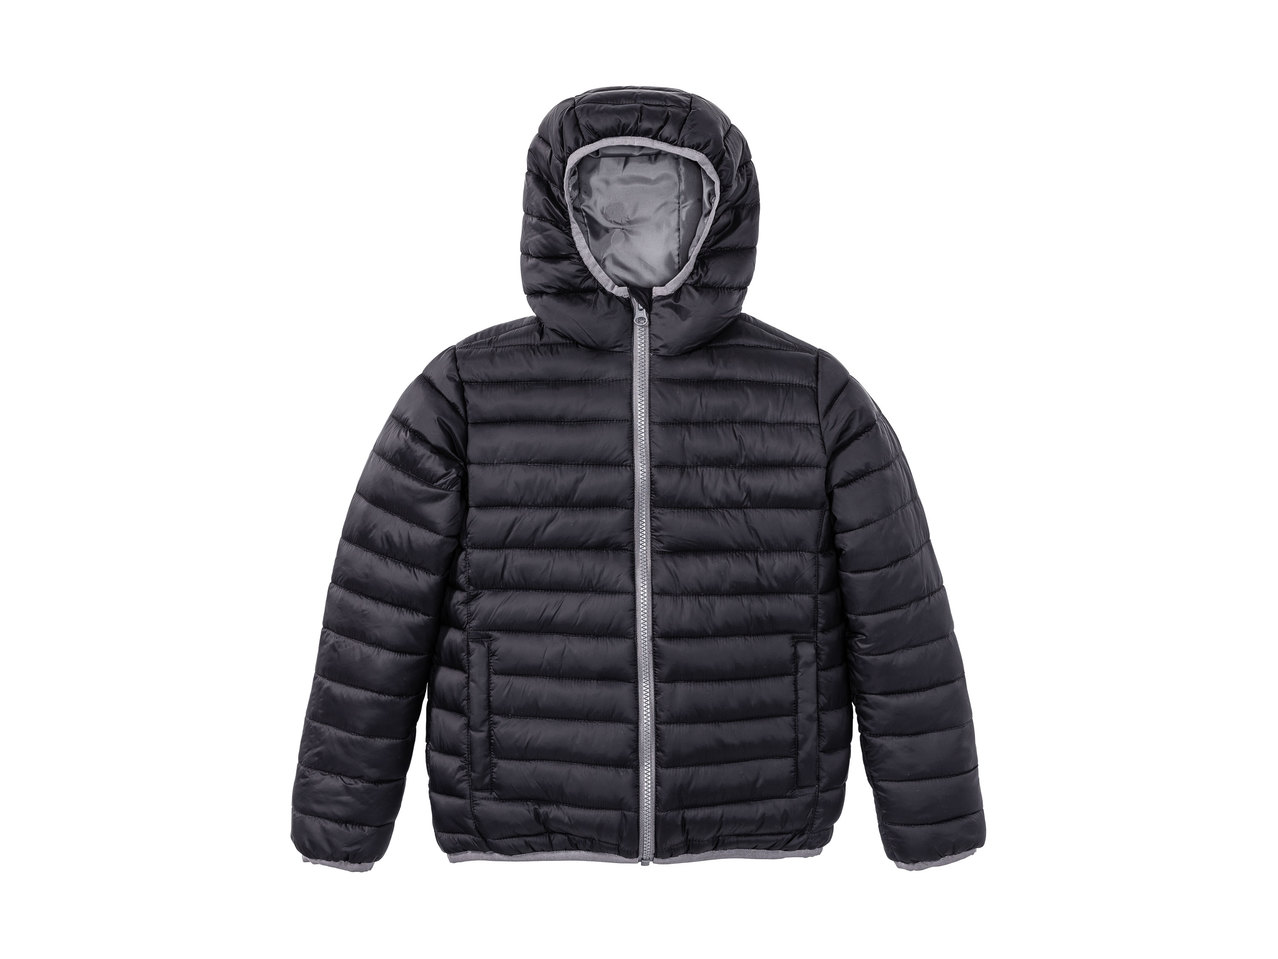 Pepperts Kids' Lightweight Thermal Jacket1 - Lidl — Great Britain ...